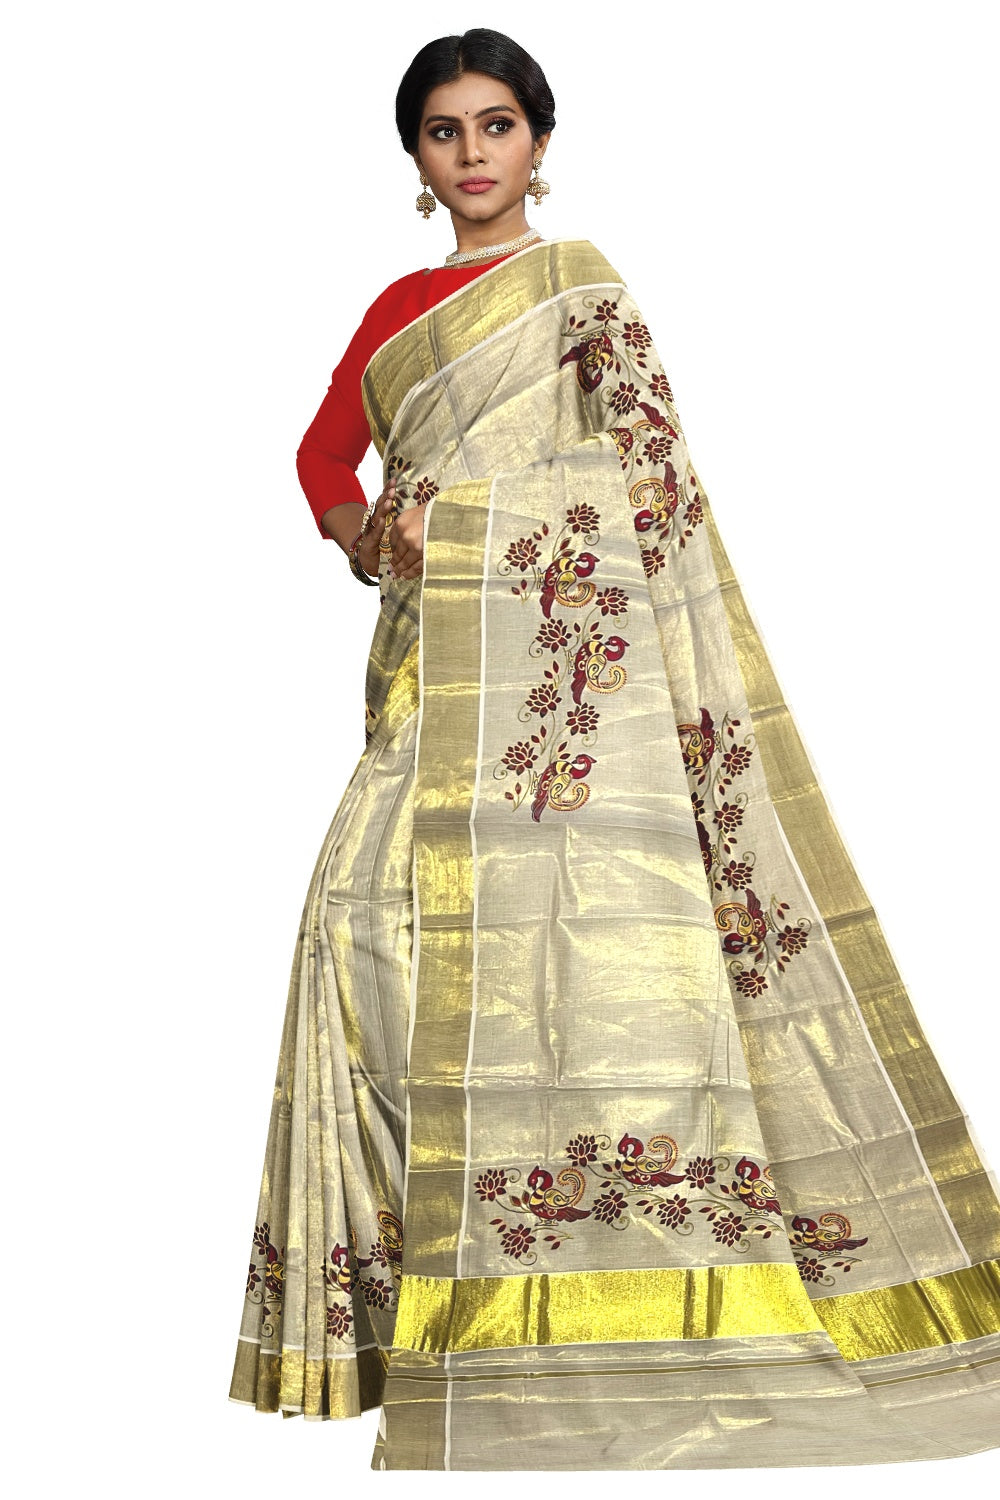 Kerala Tissue Kasavu Saree With Mural Red Peacock and Floral Printed Design